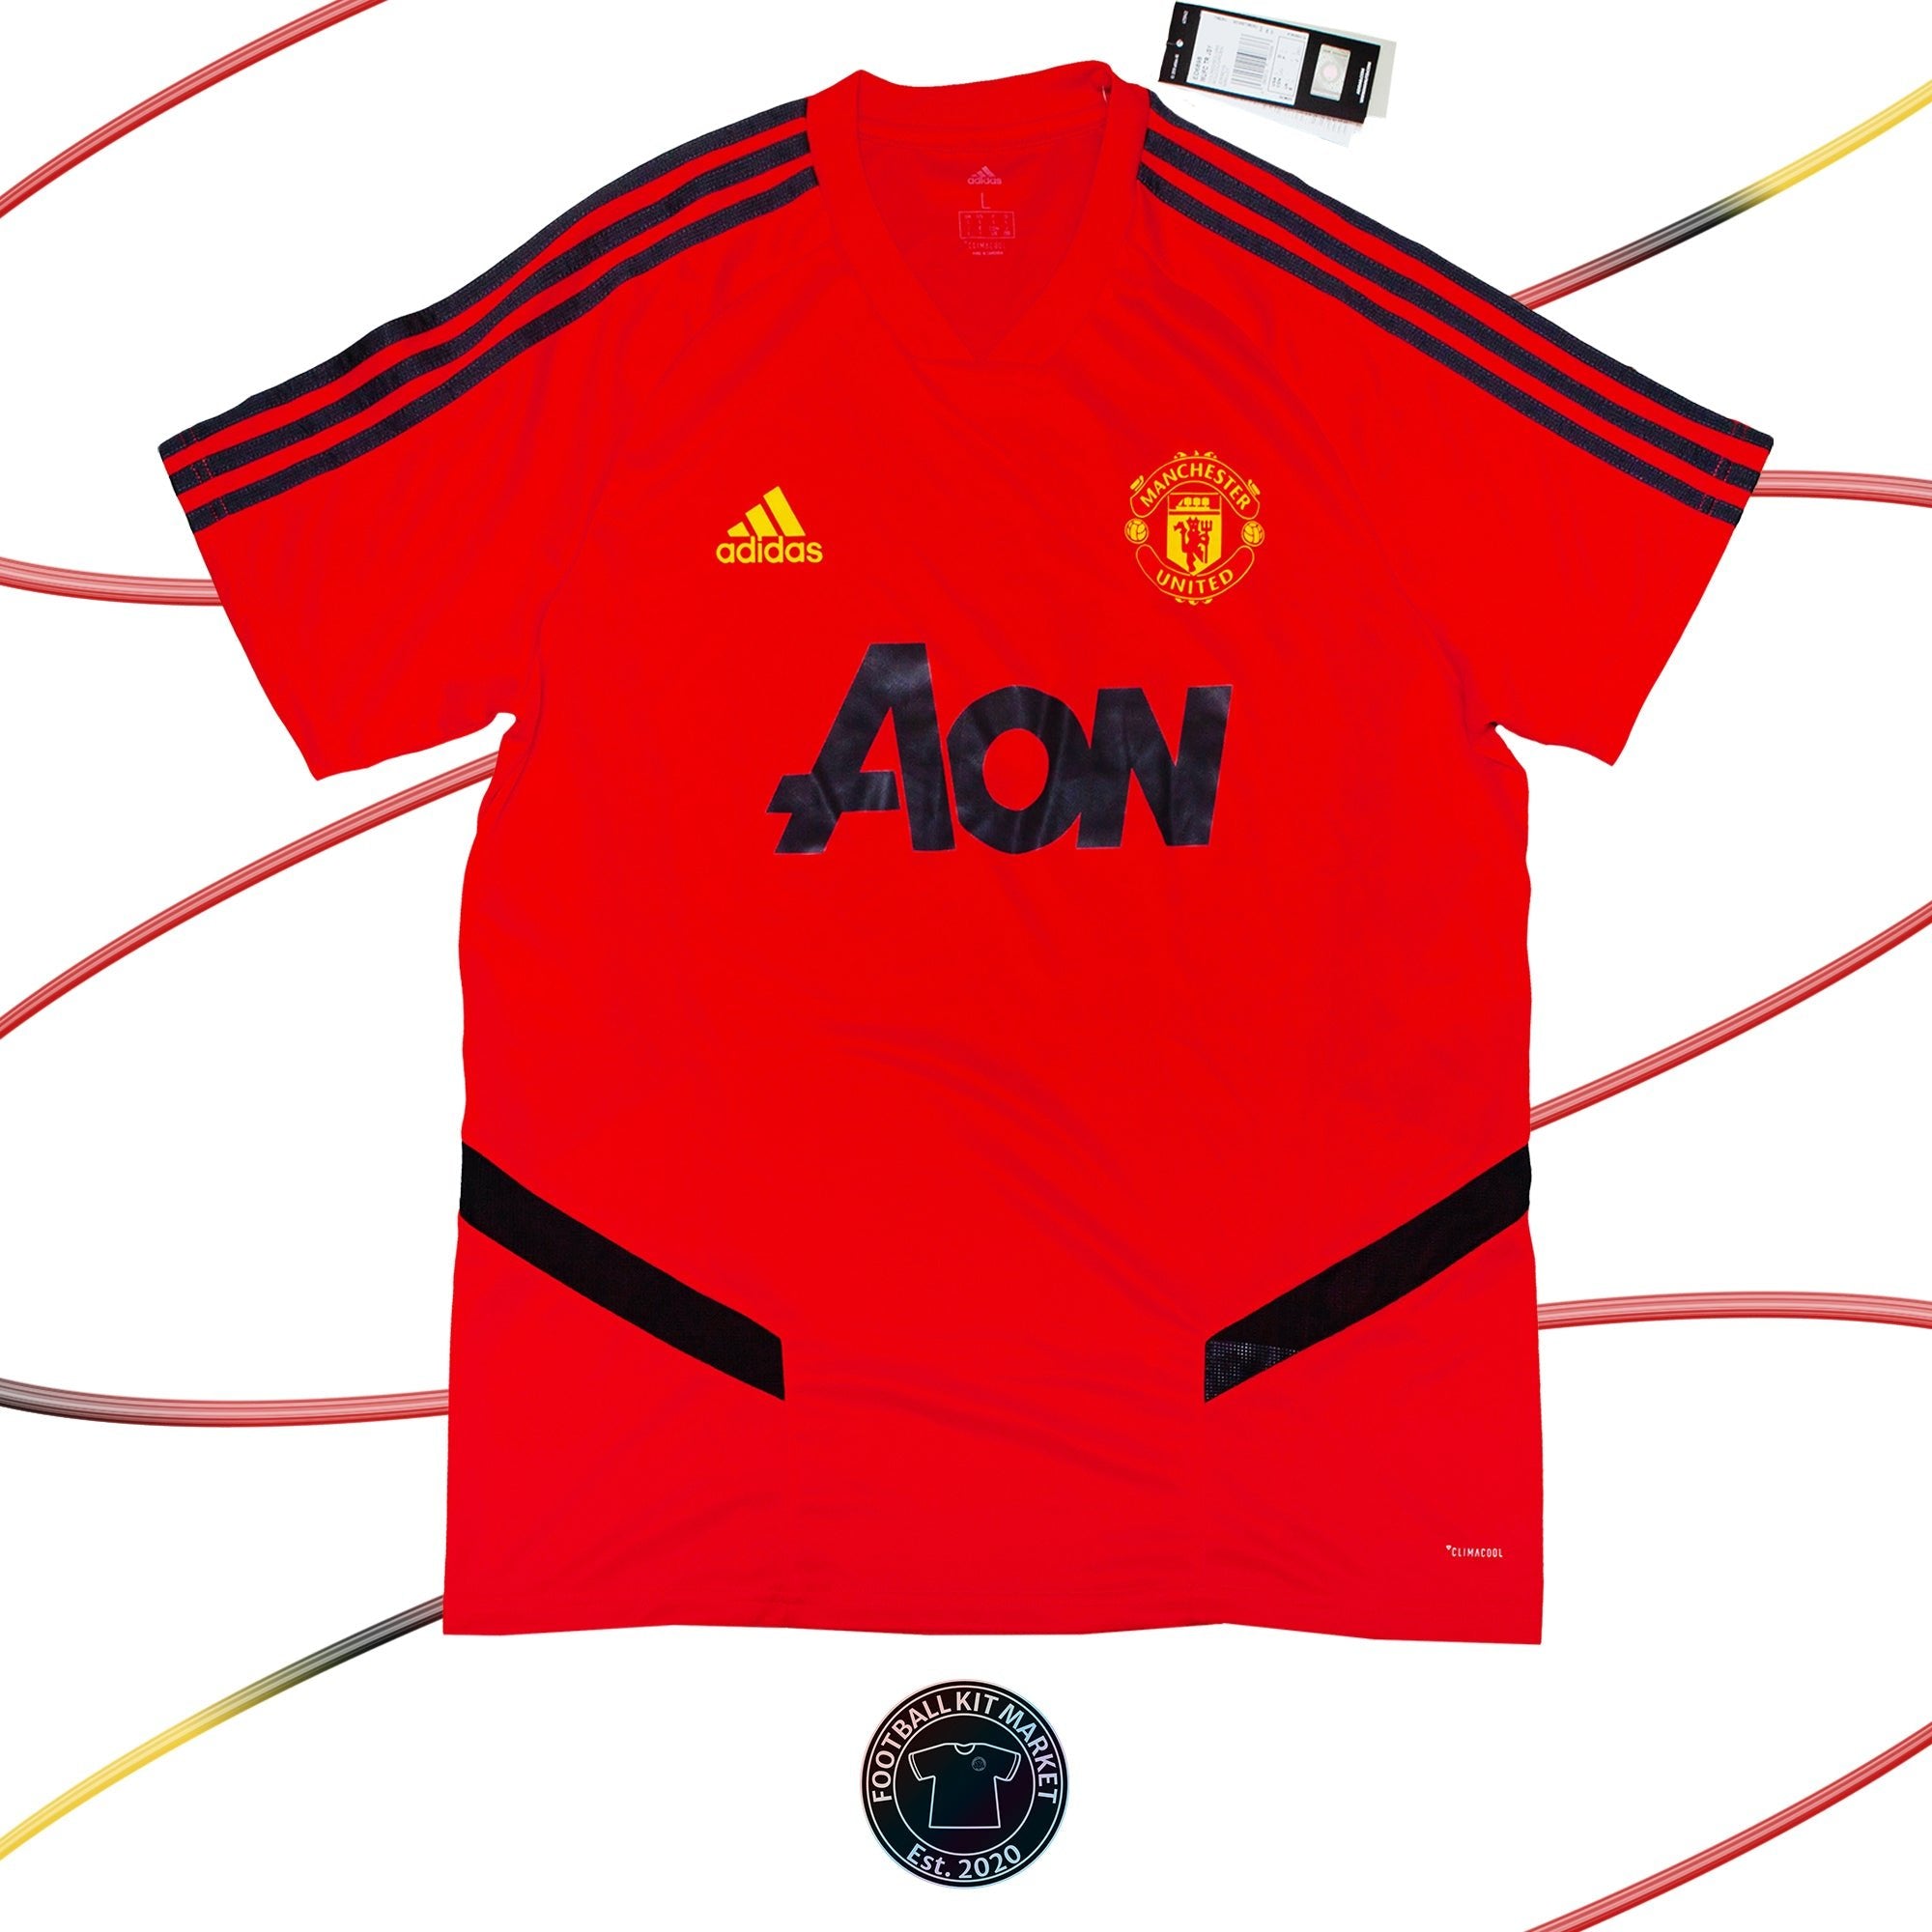 Genuine MANCHESTER UNITED Training (2019-2020) - ADIDAS (L) - Product Image from Football Kit Market